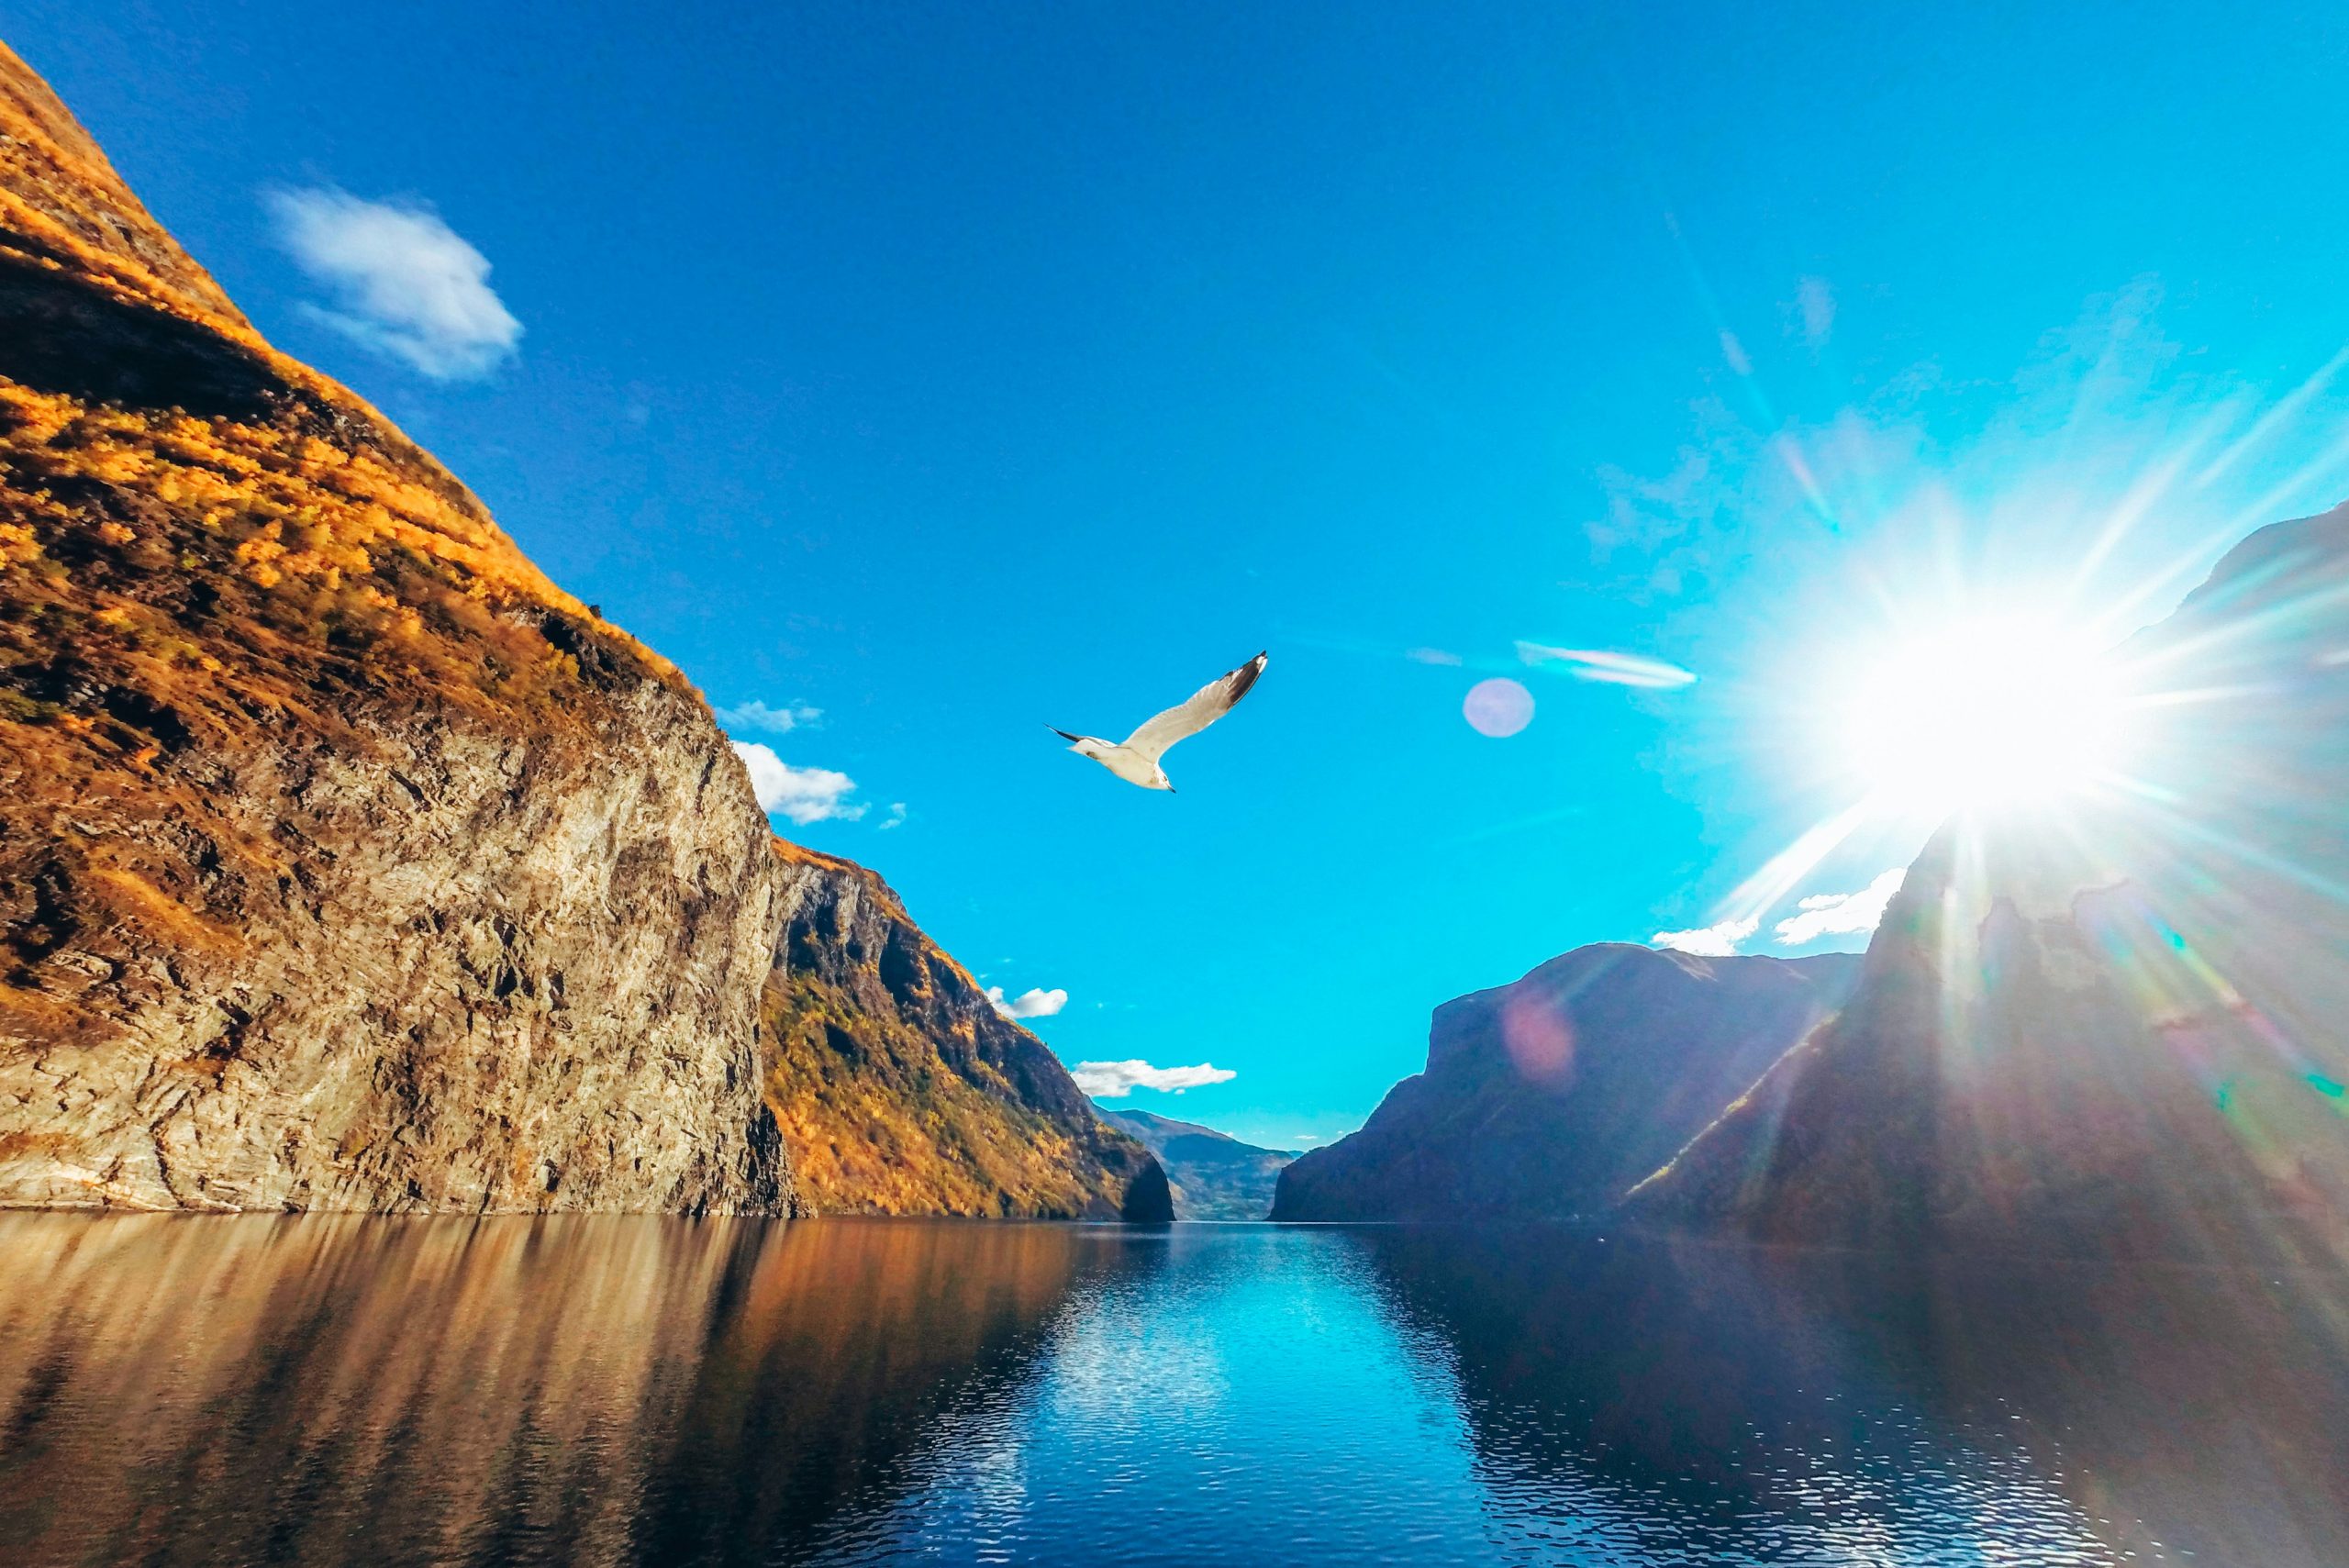 discover the breathtaking beauty of norway's fjords with stunning cliffs, crystal clear waters, and picturesque landscapes.